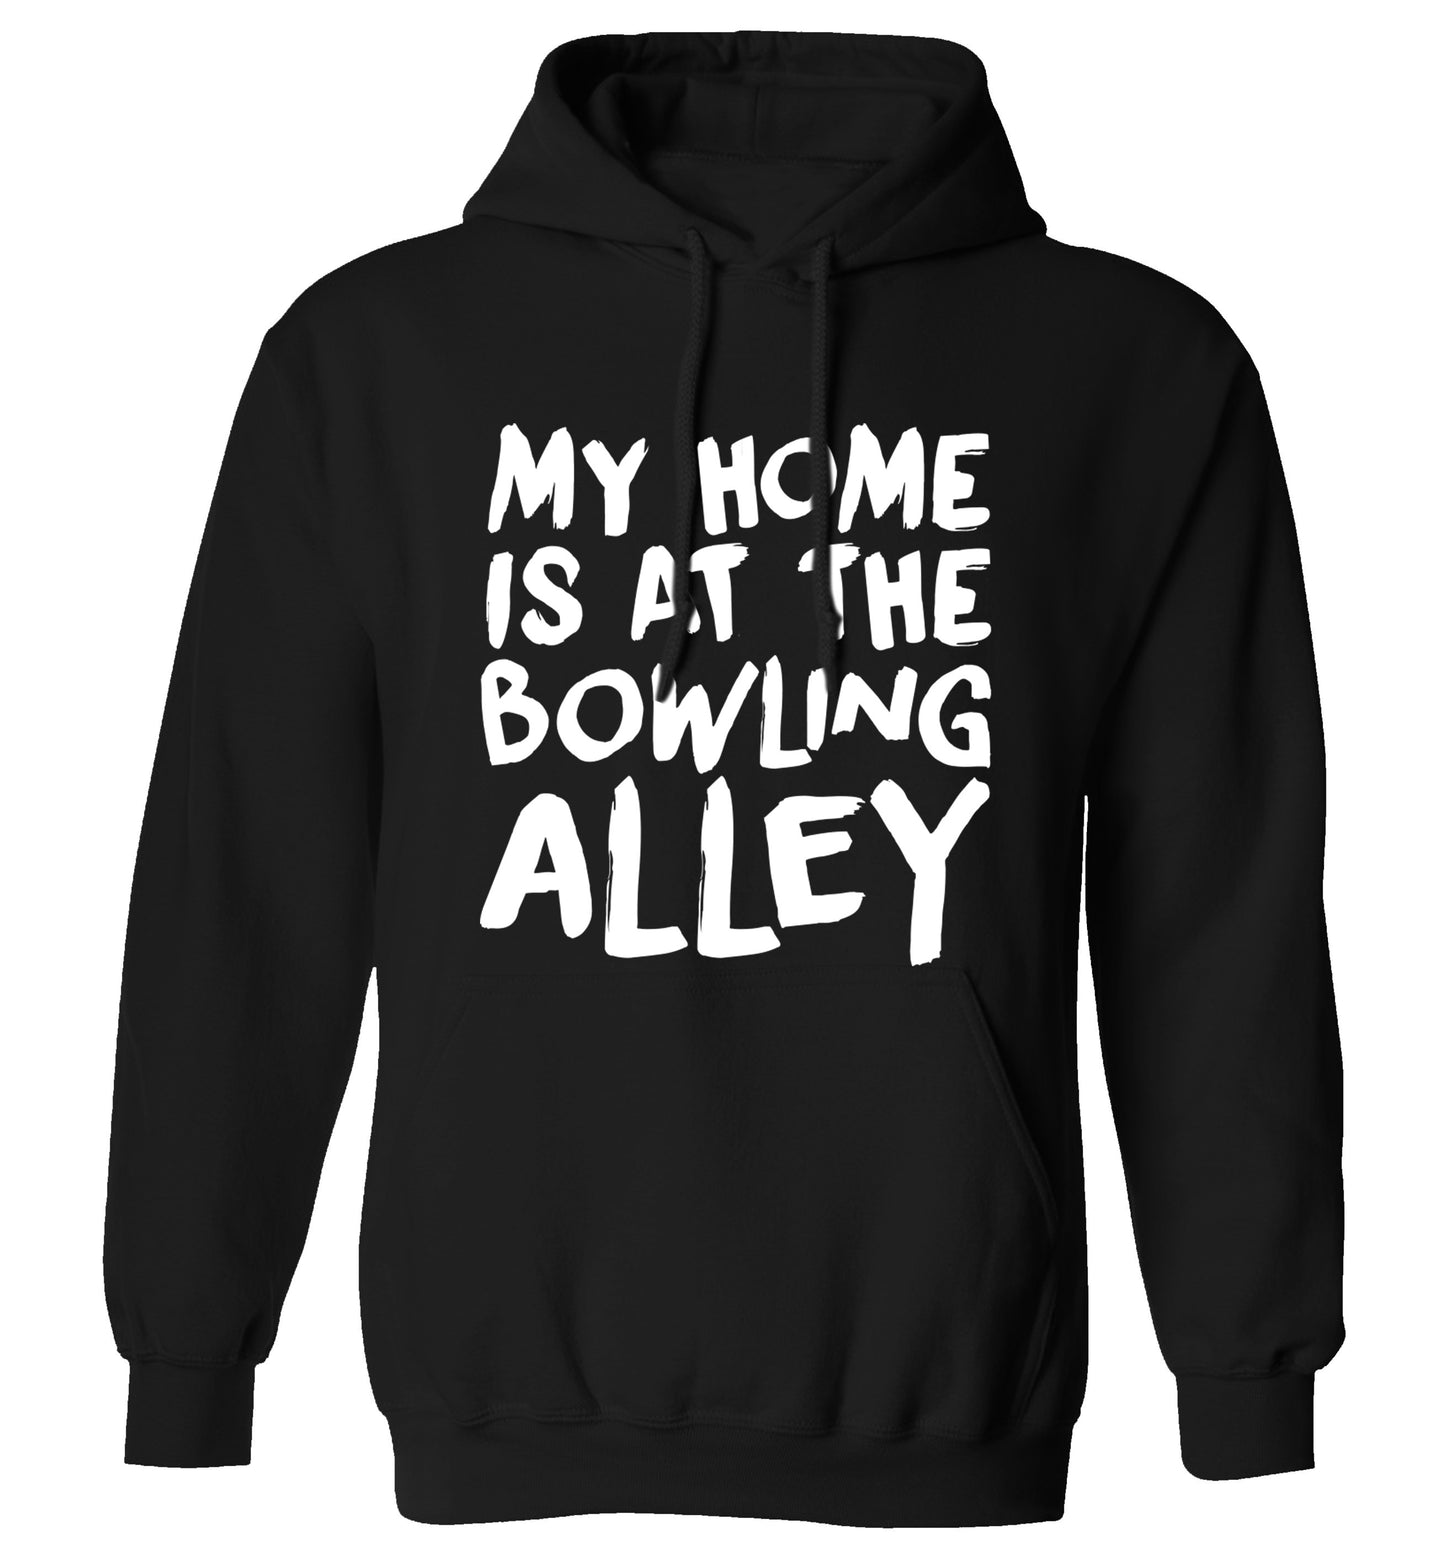 My home is at the bowling alley adults unisex black hoodie 2XL